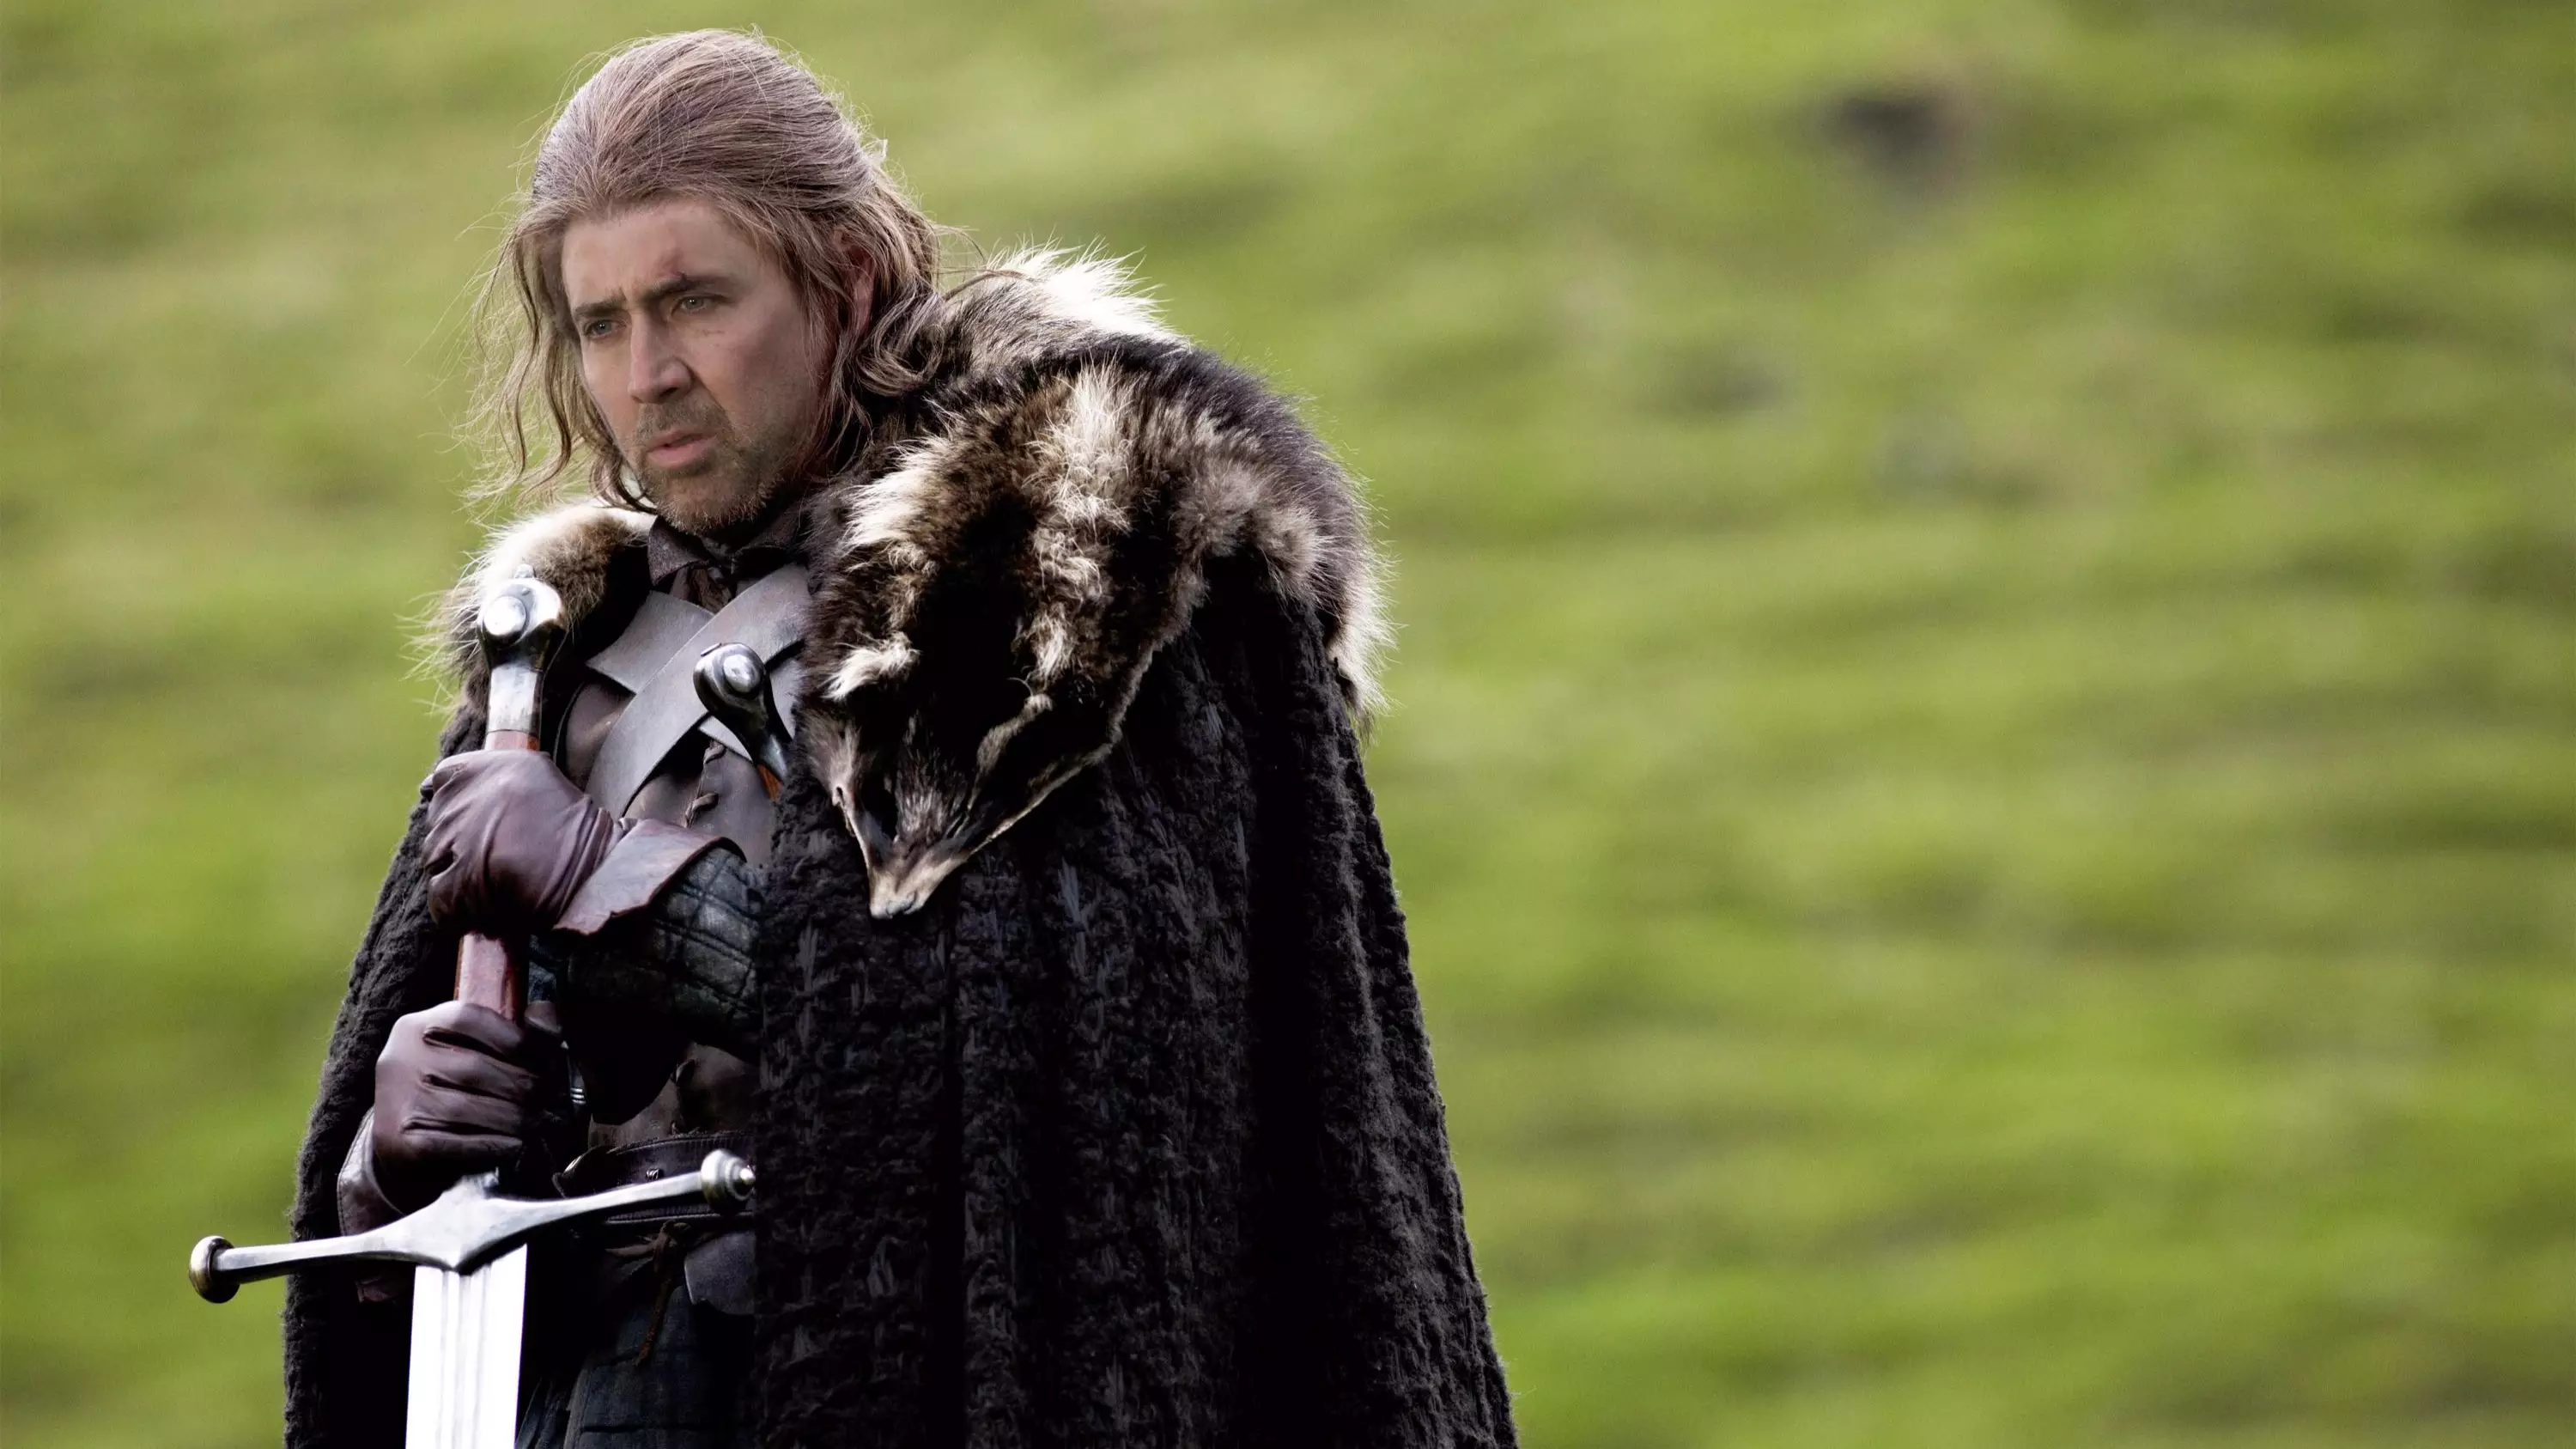 Nicholas Cage As Every 'Game Of Thrones' Character Will Give You Nightmares